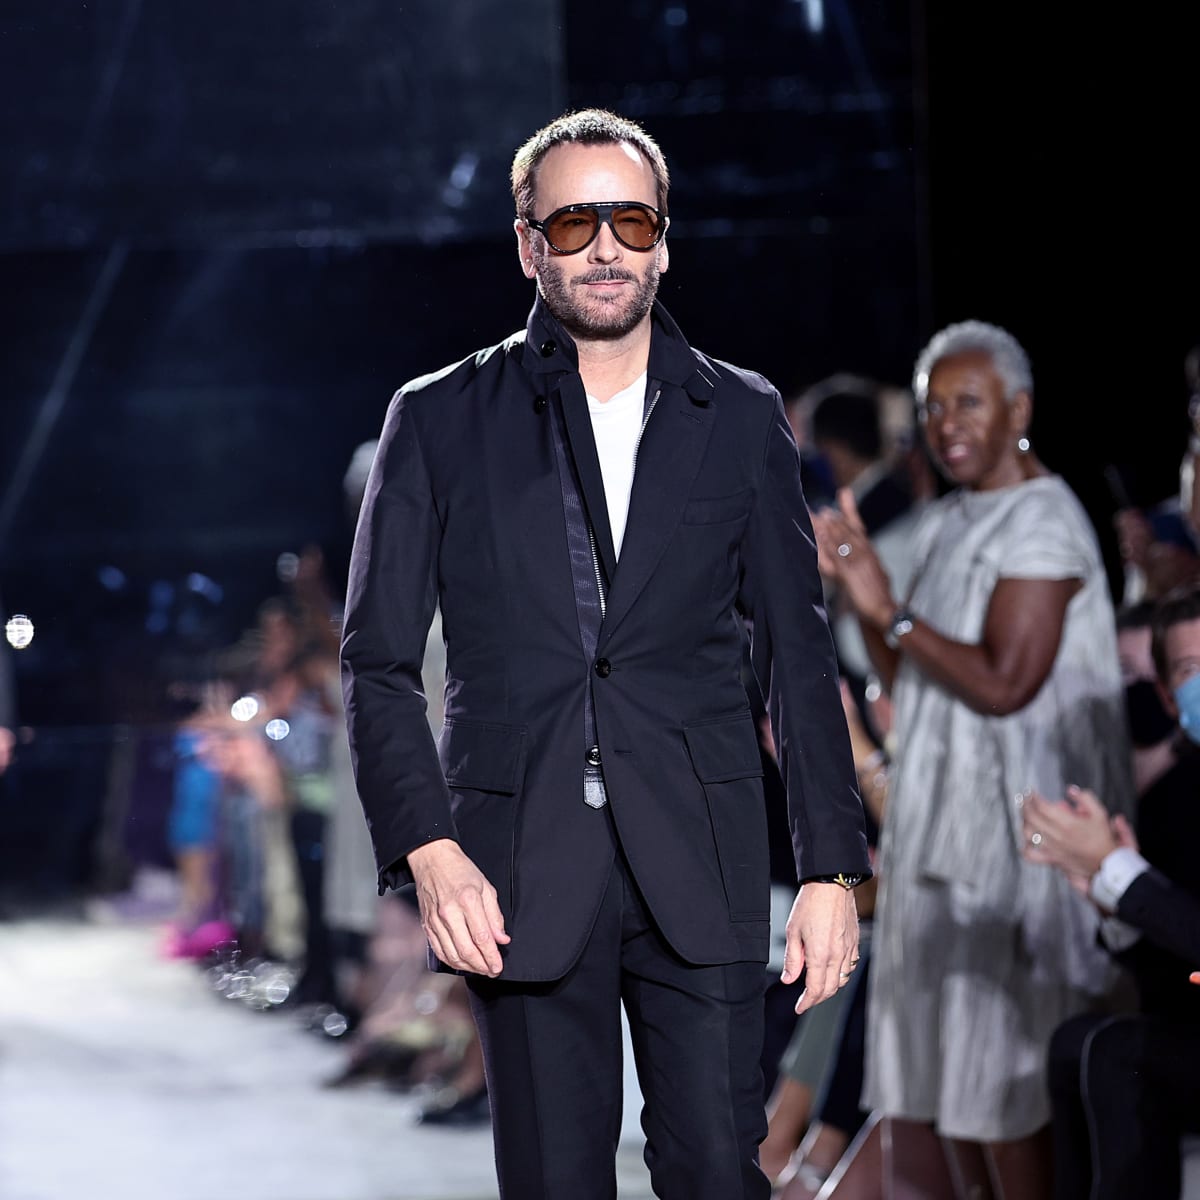 Tom Ford Reissues His Favorite Looks in Surprise 'Final Collection' -  Fashionista